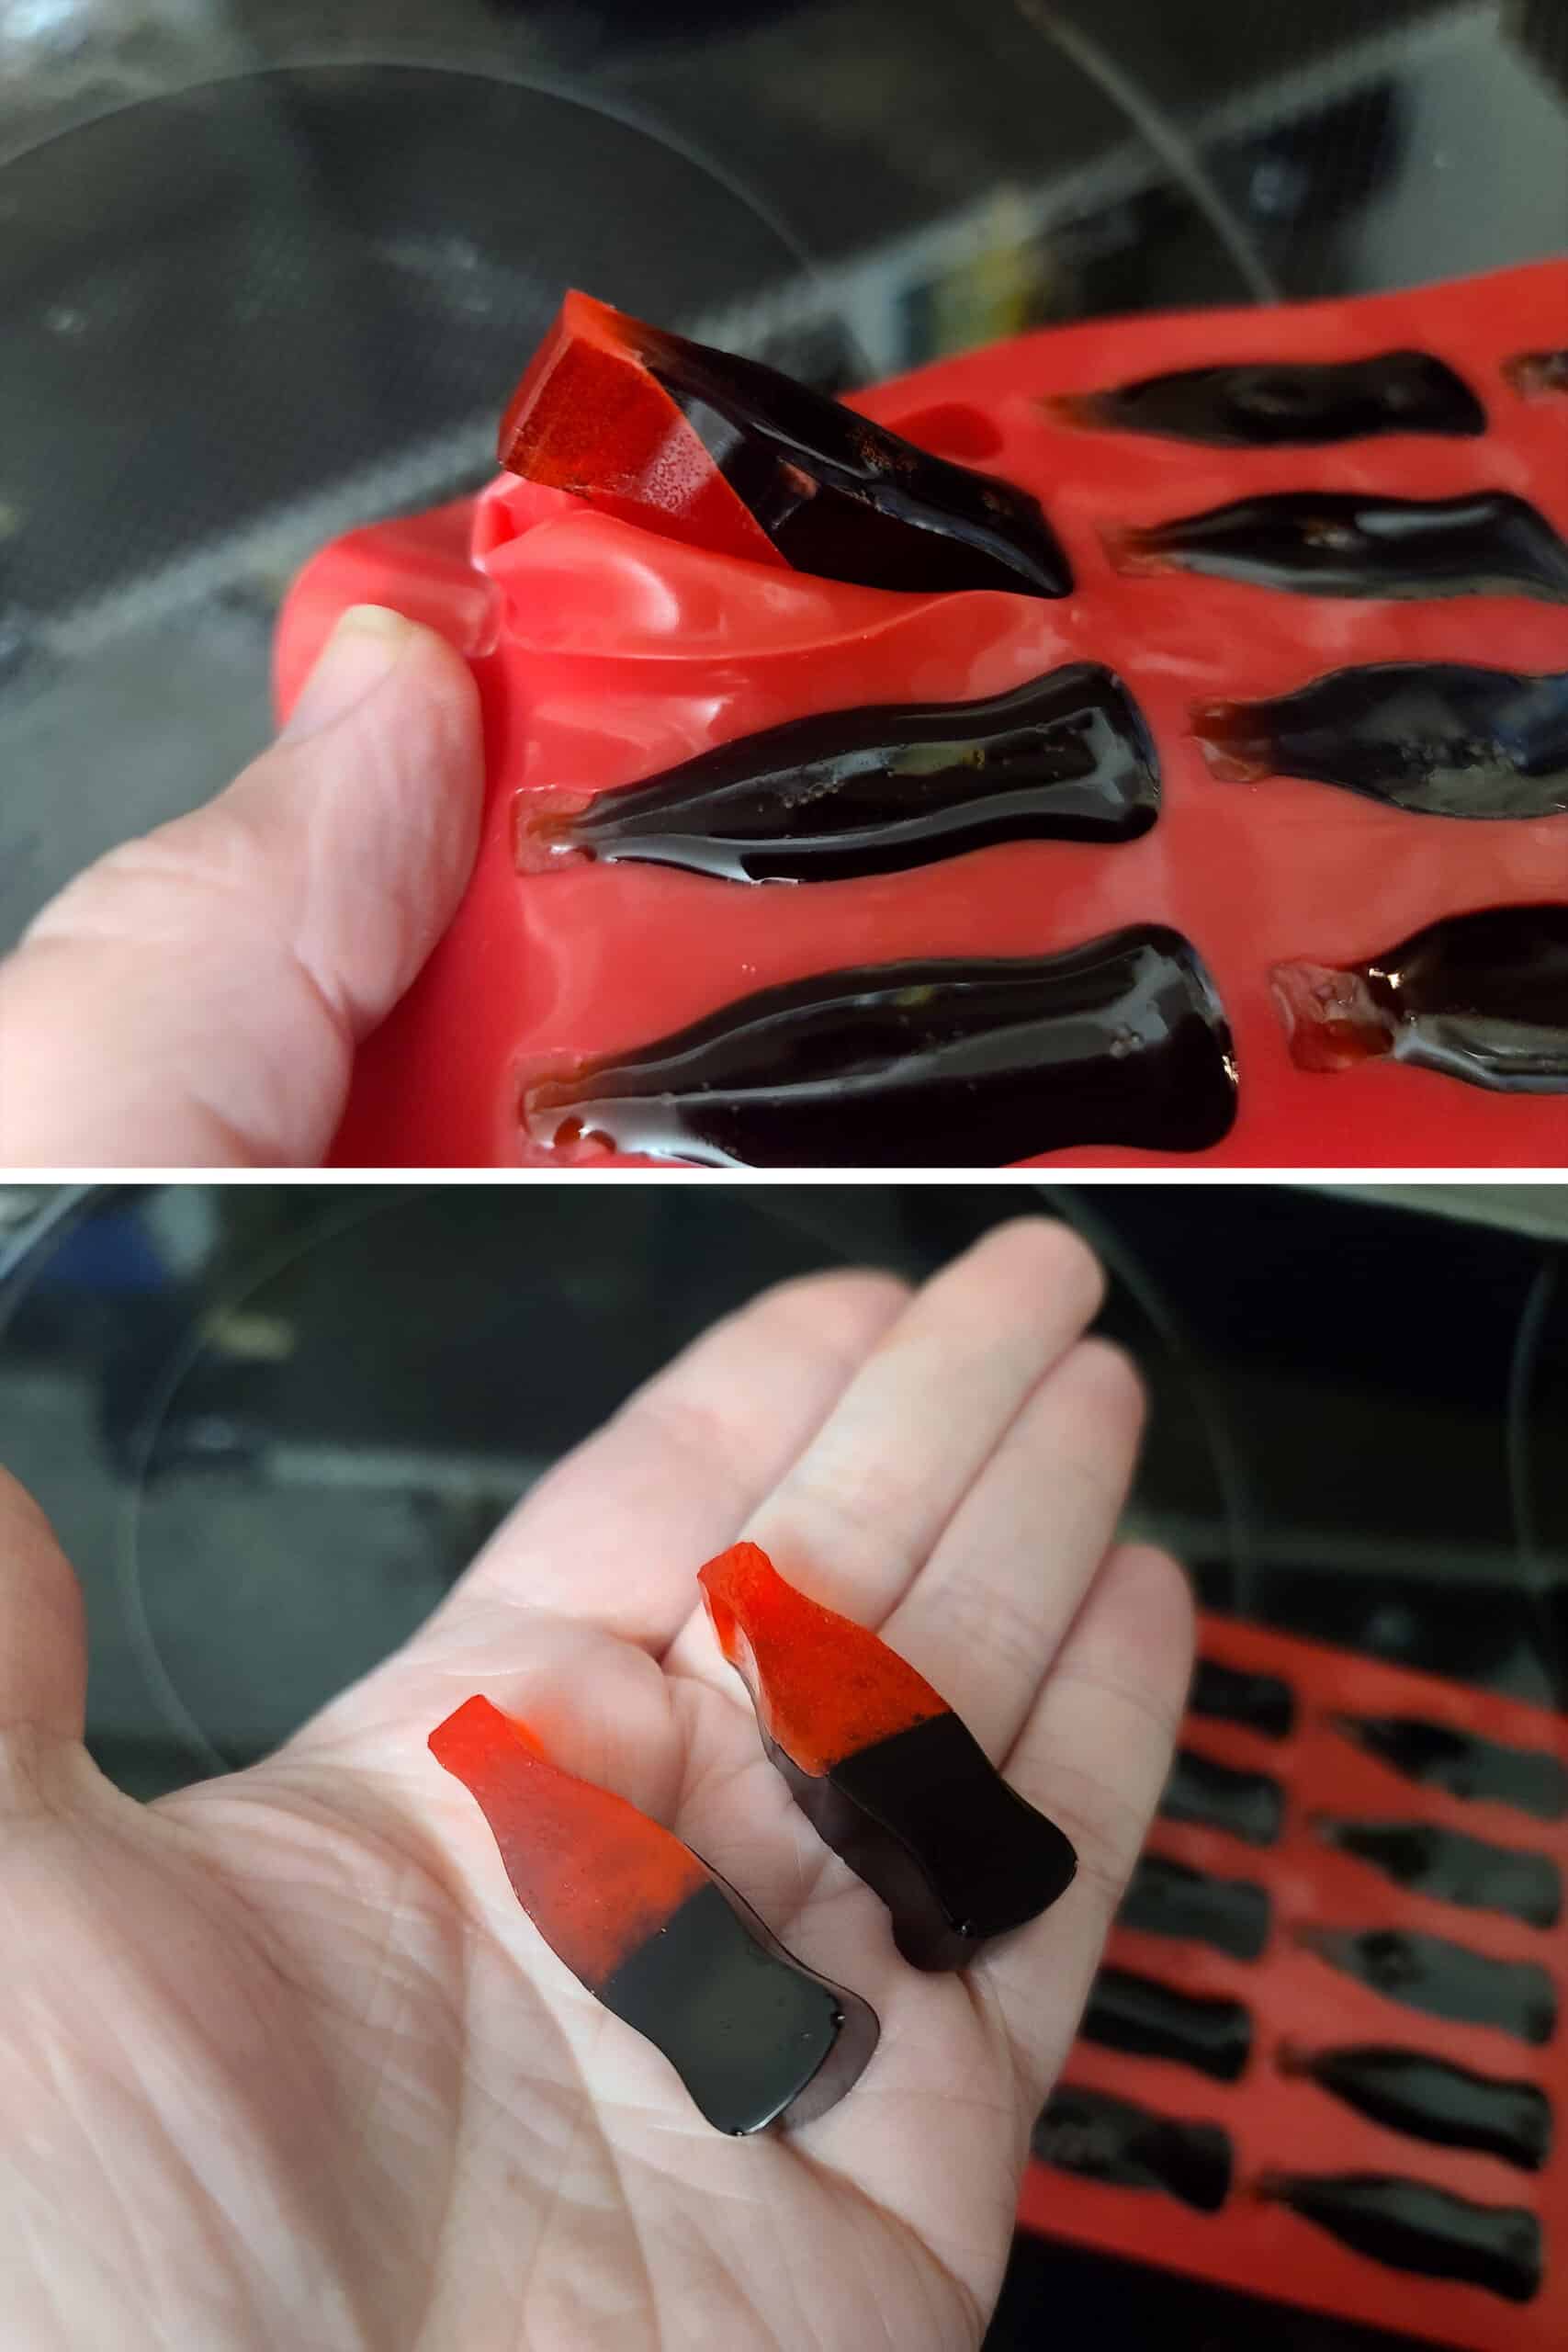 2 part image showing the finish gummies being popped out of the mold, and a hand holding 2 bicolor red and brown sugar free sour cherry cola bottle gummies.